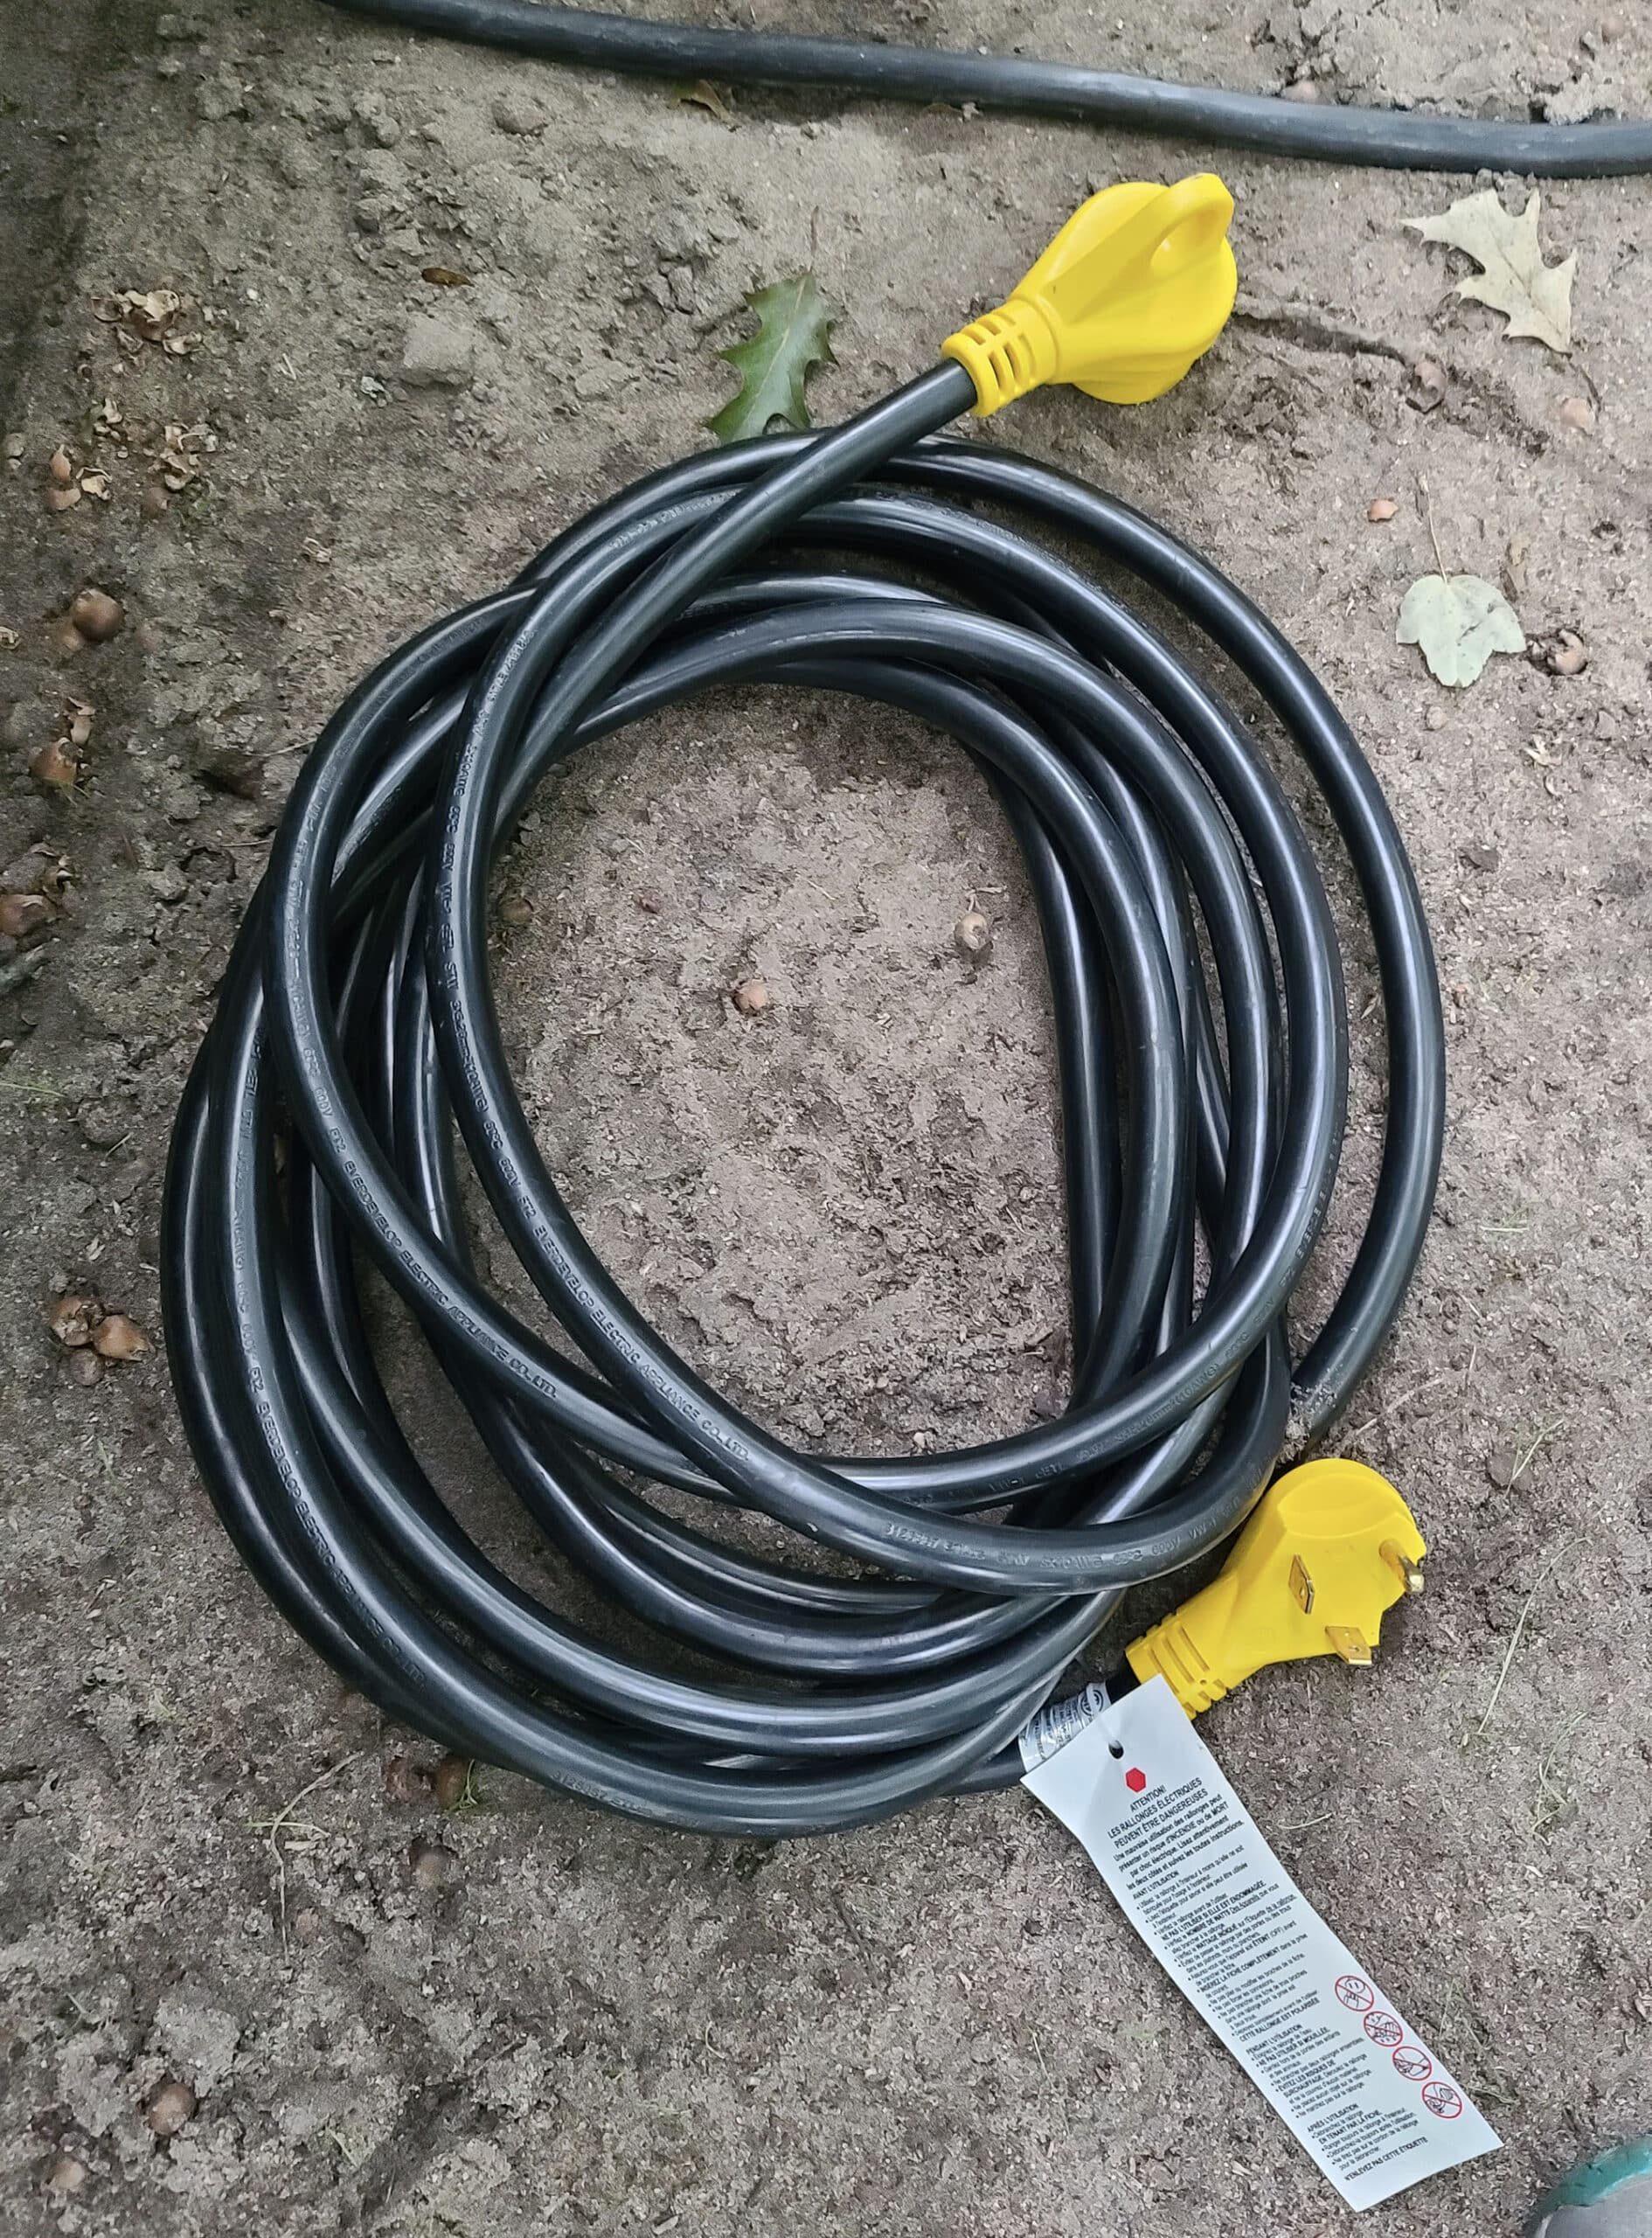 A black RV electrical cord coiled on the ground.